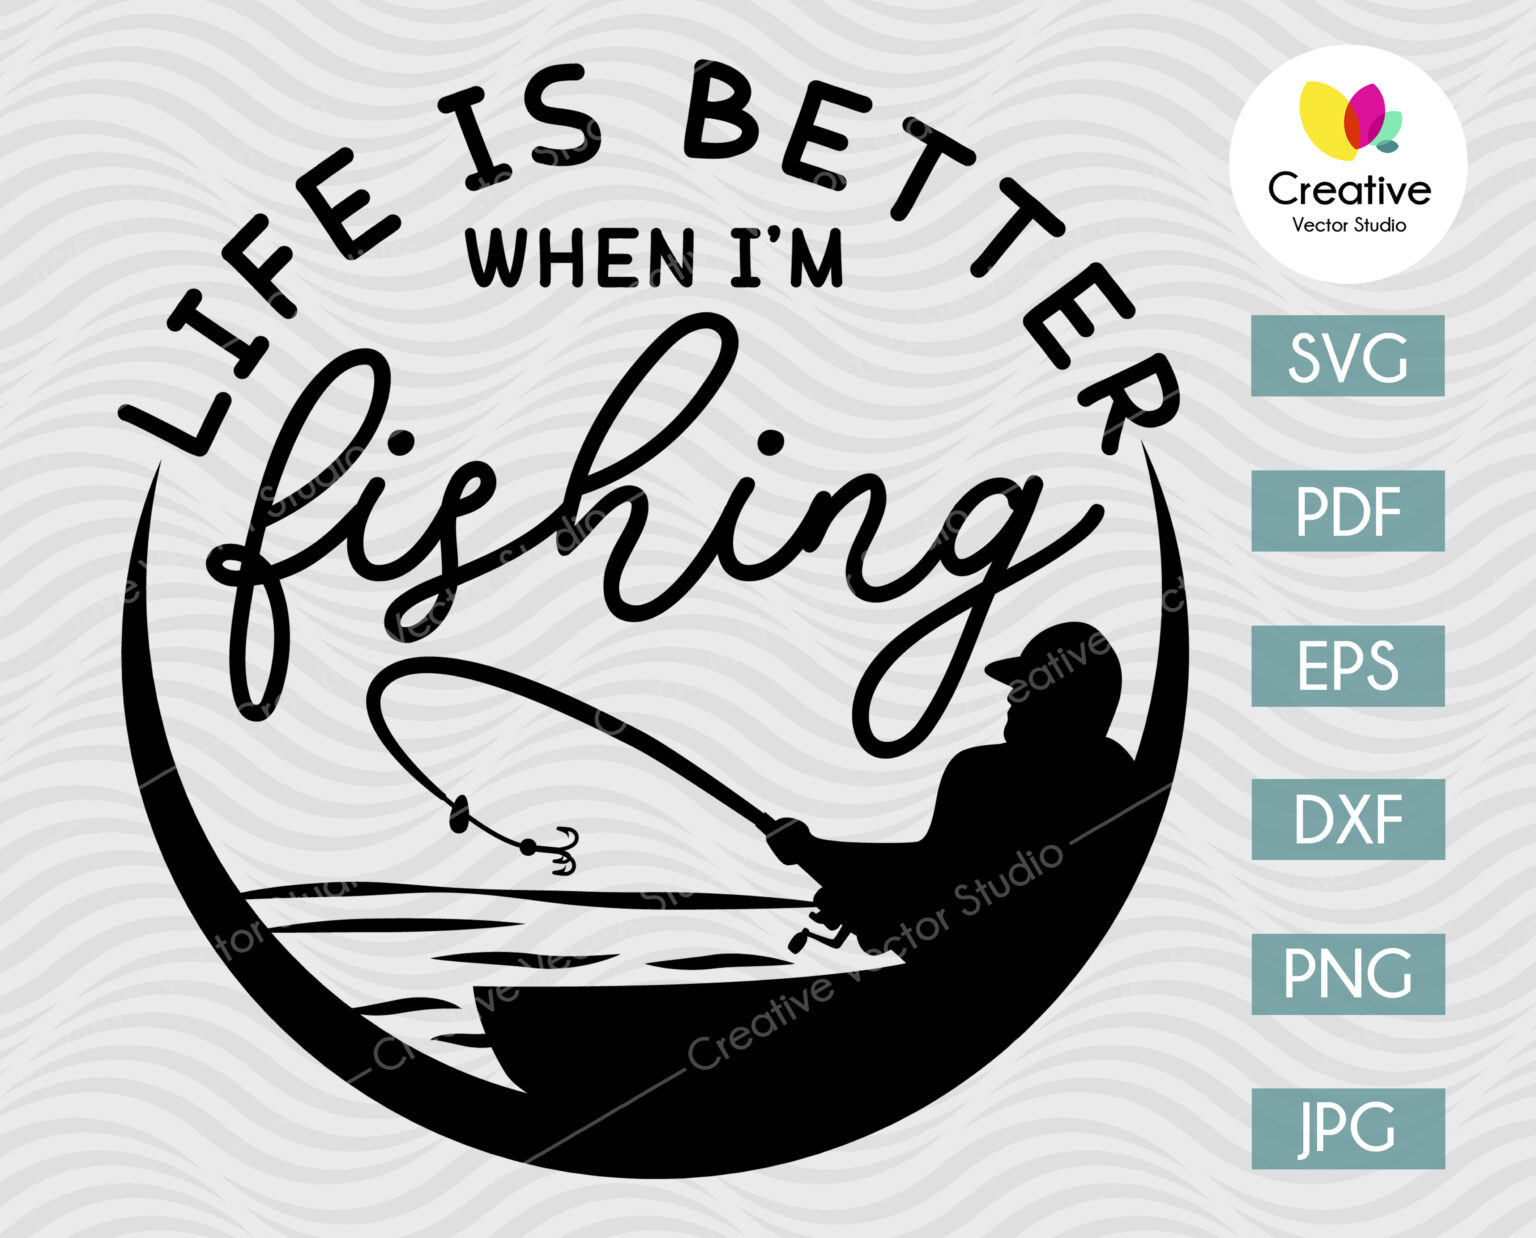 Life Is Better When I'm Fishing SVG | Creative Vector Studio